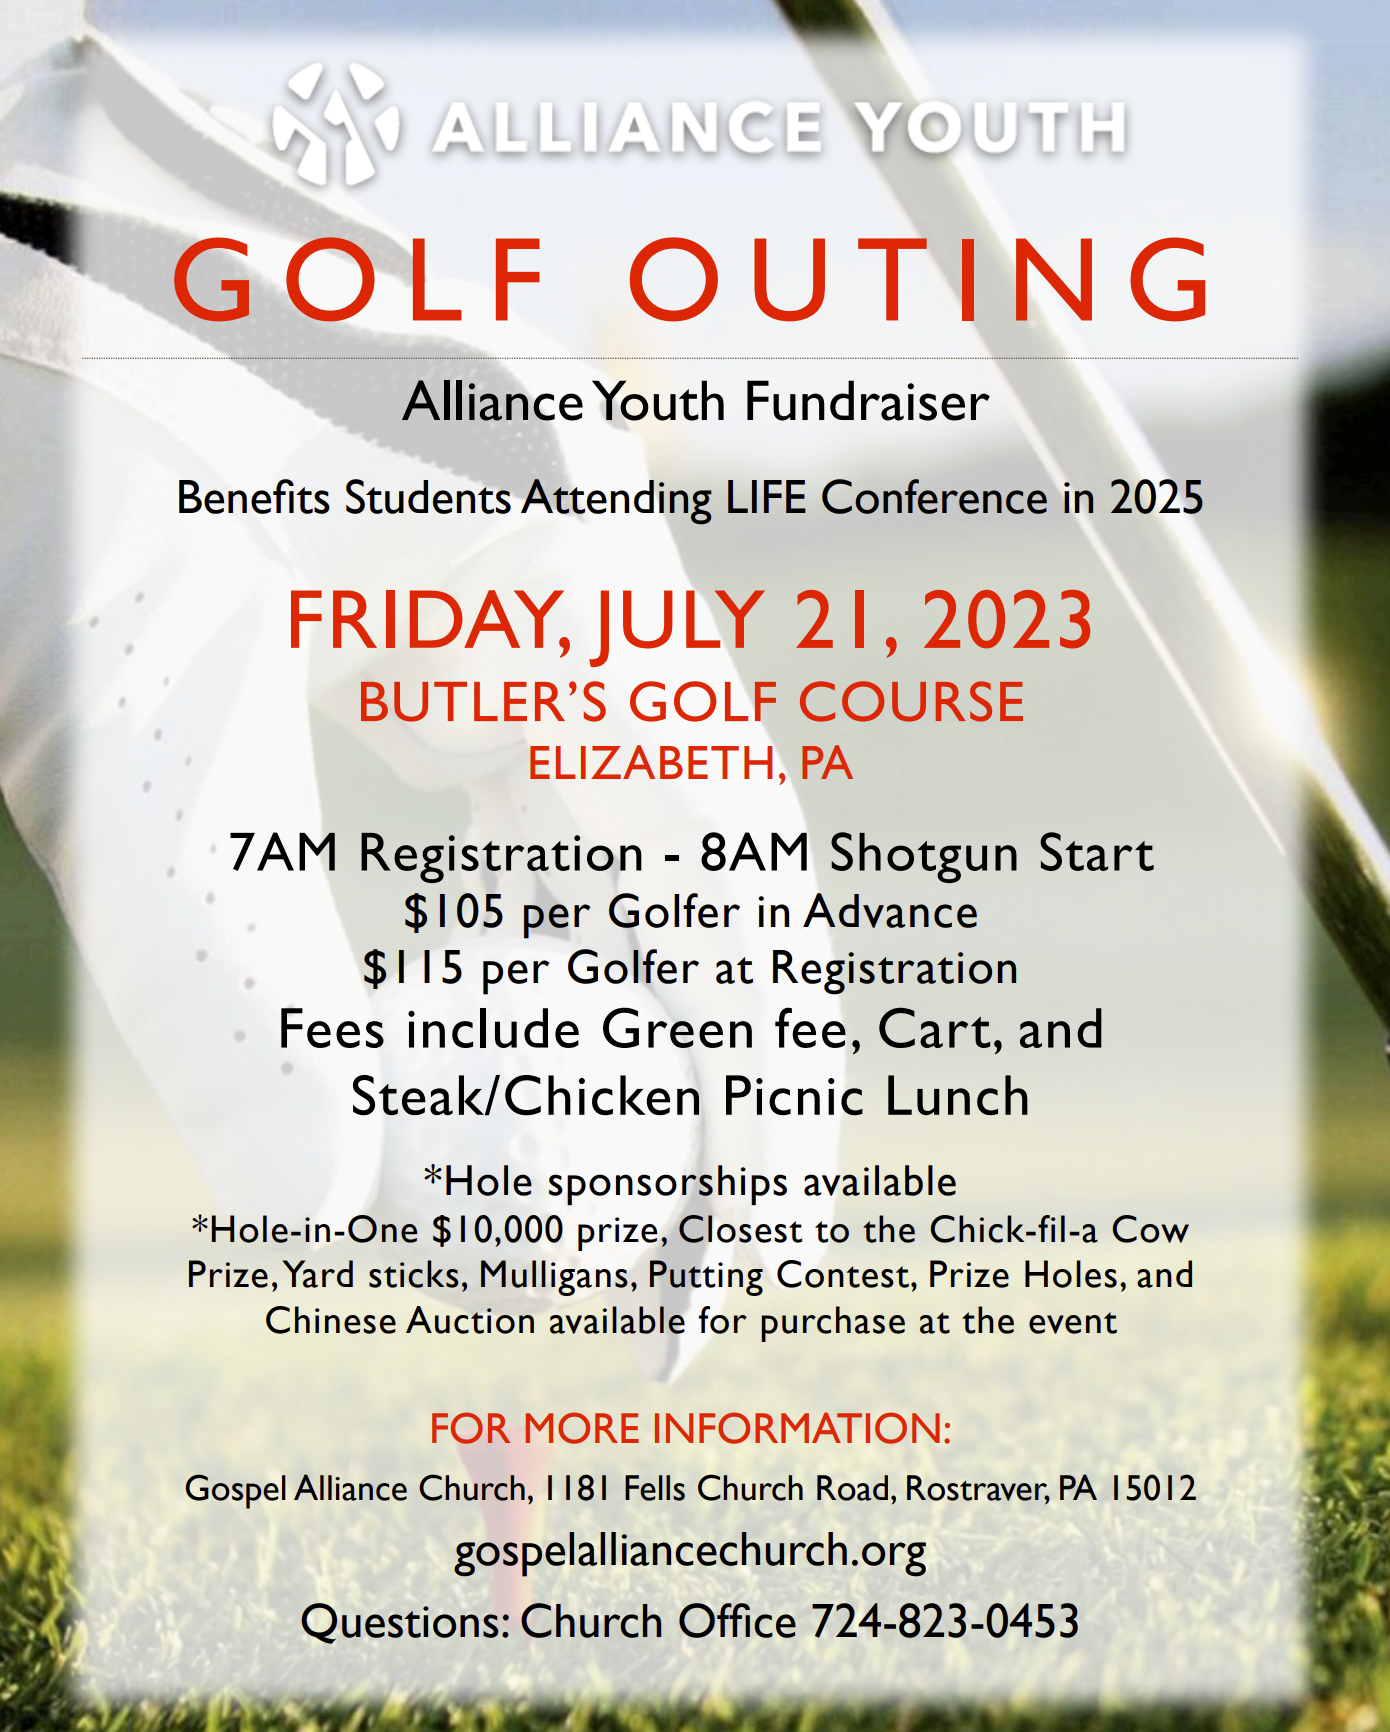 ALLIANCE YOUTH FUNDRAISER/GOLF OUTING